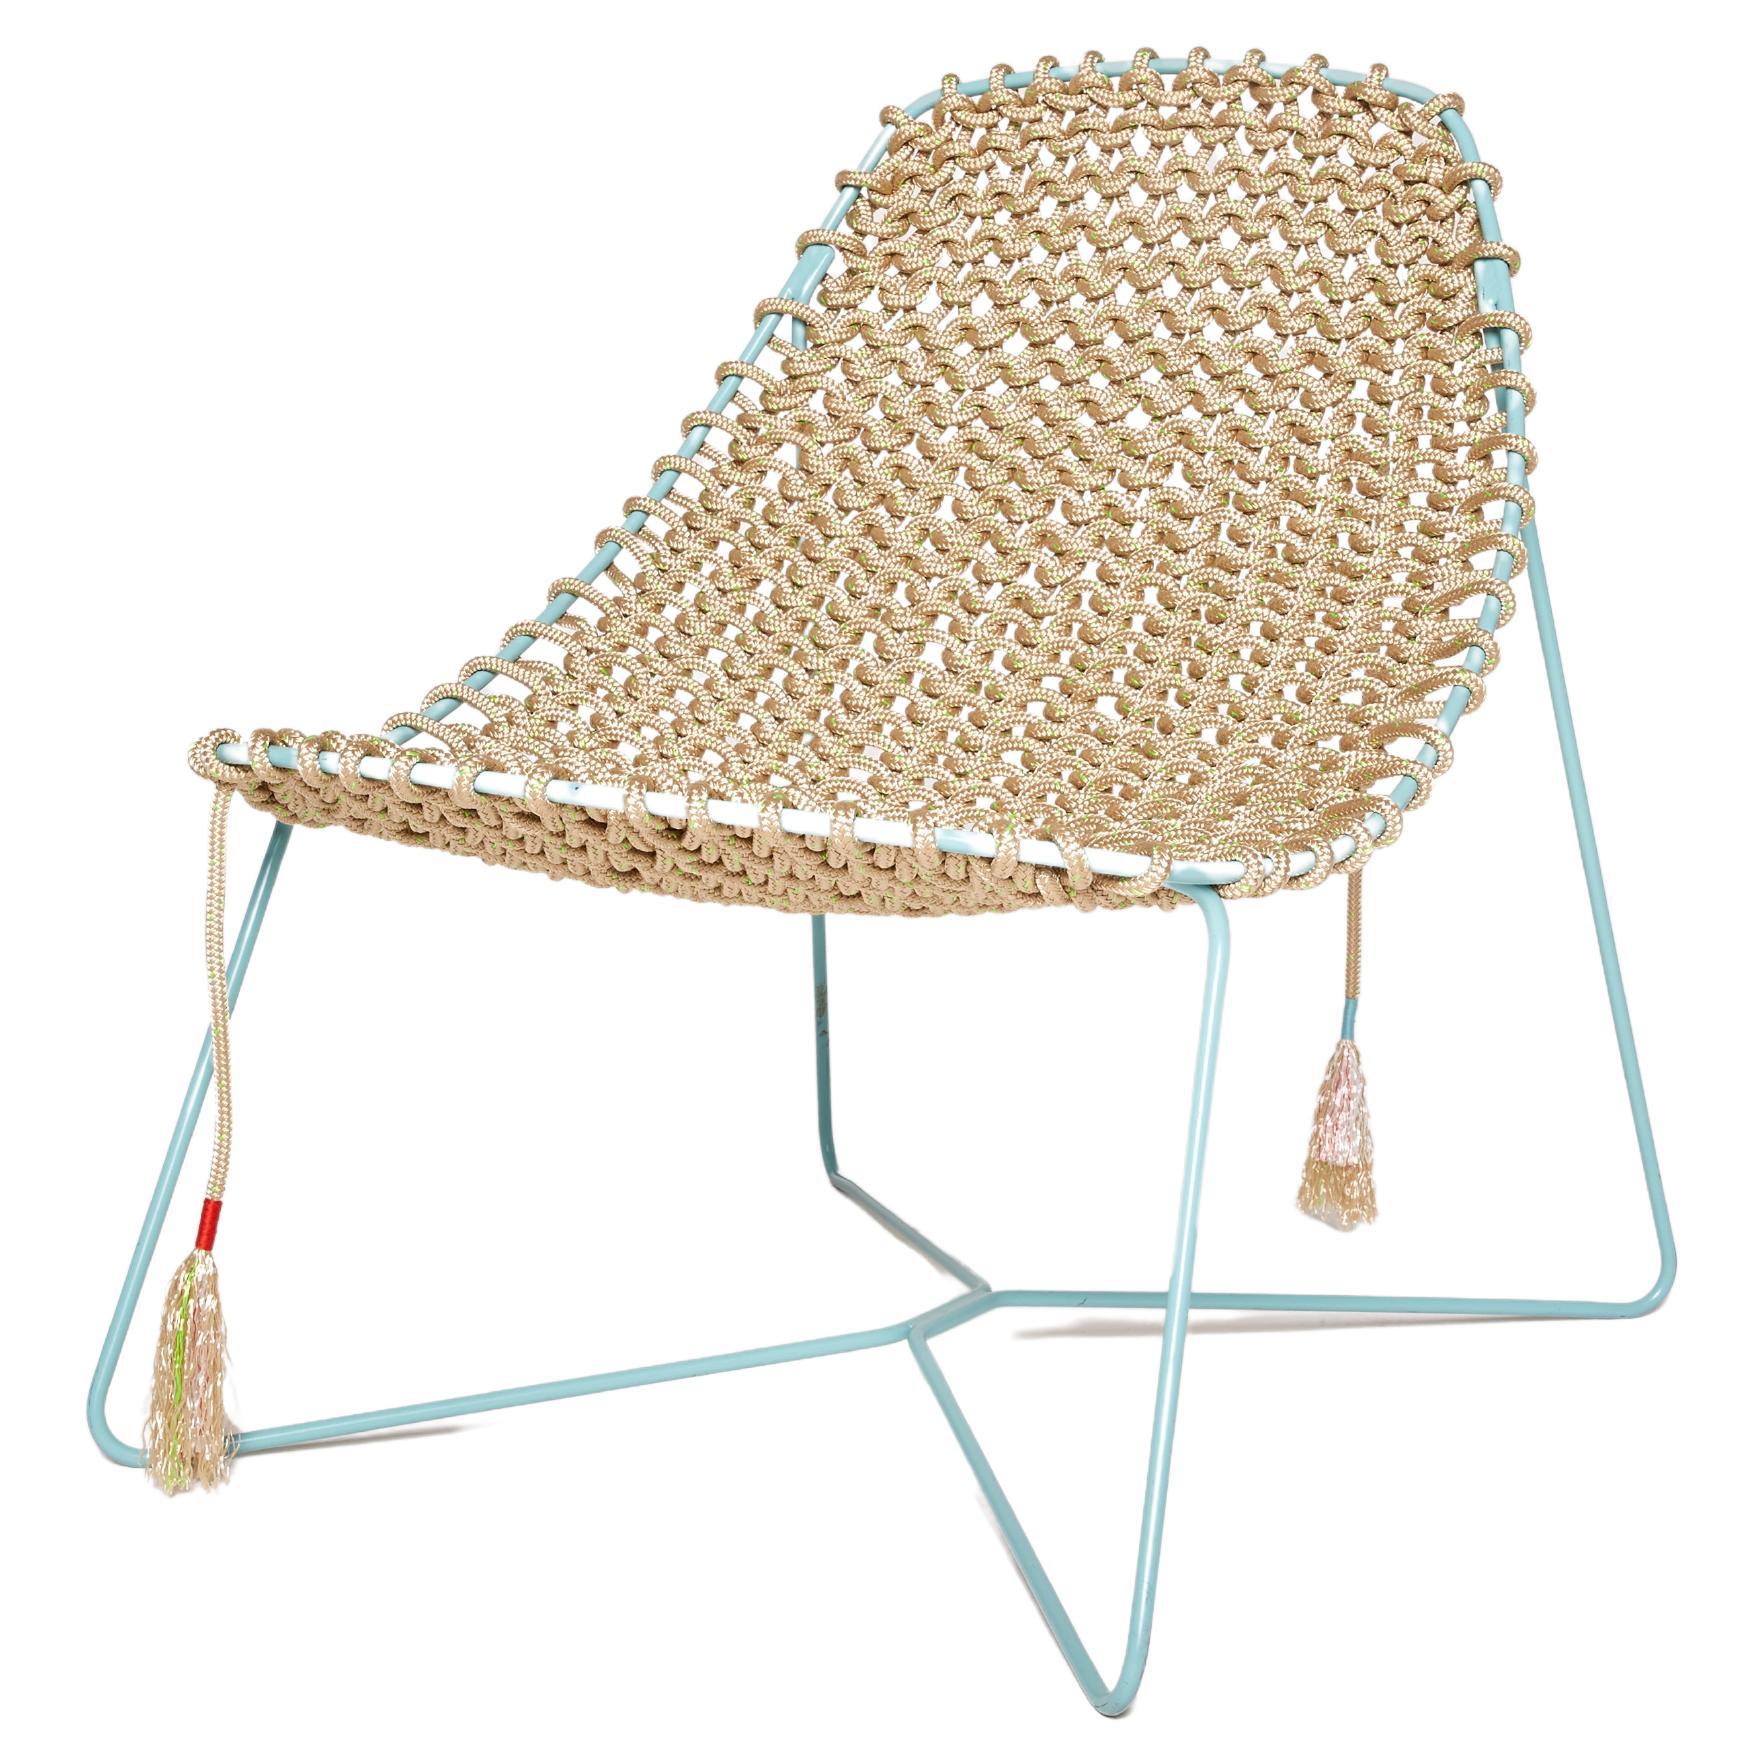 Award nominated beige hand knitted lounger with blue frame